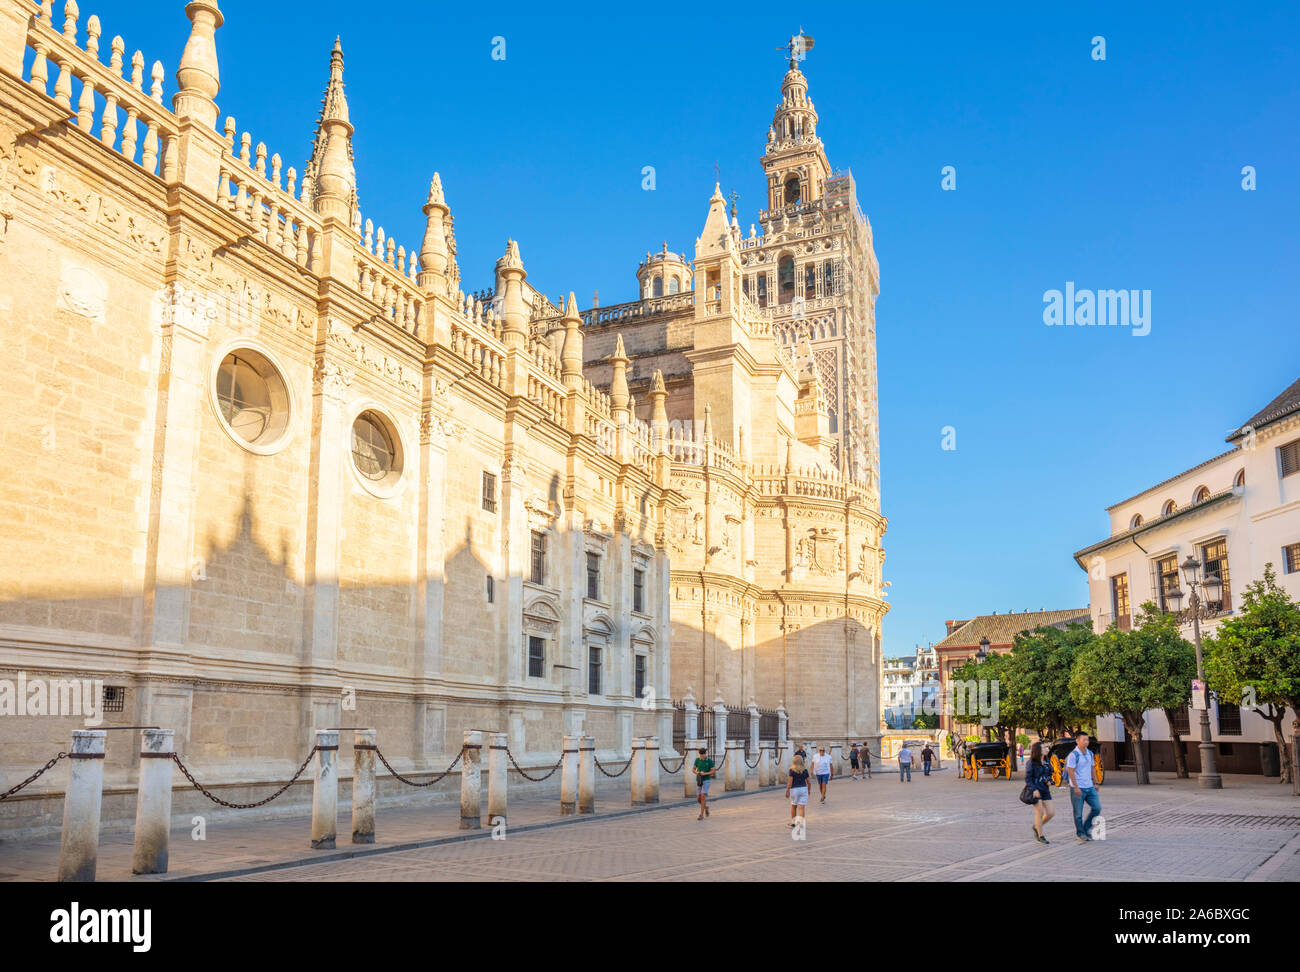 Sevilla Seville Spain Seville cathedral and the Seville General Archive of the Indies building Seville Spain EU Europe Stock Photo